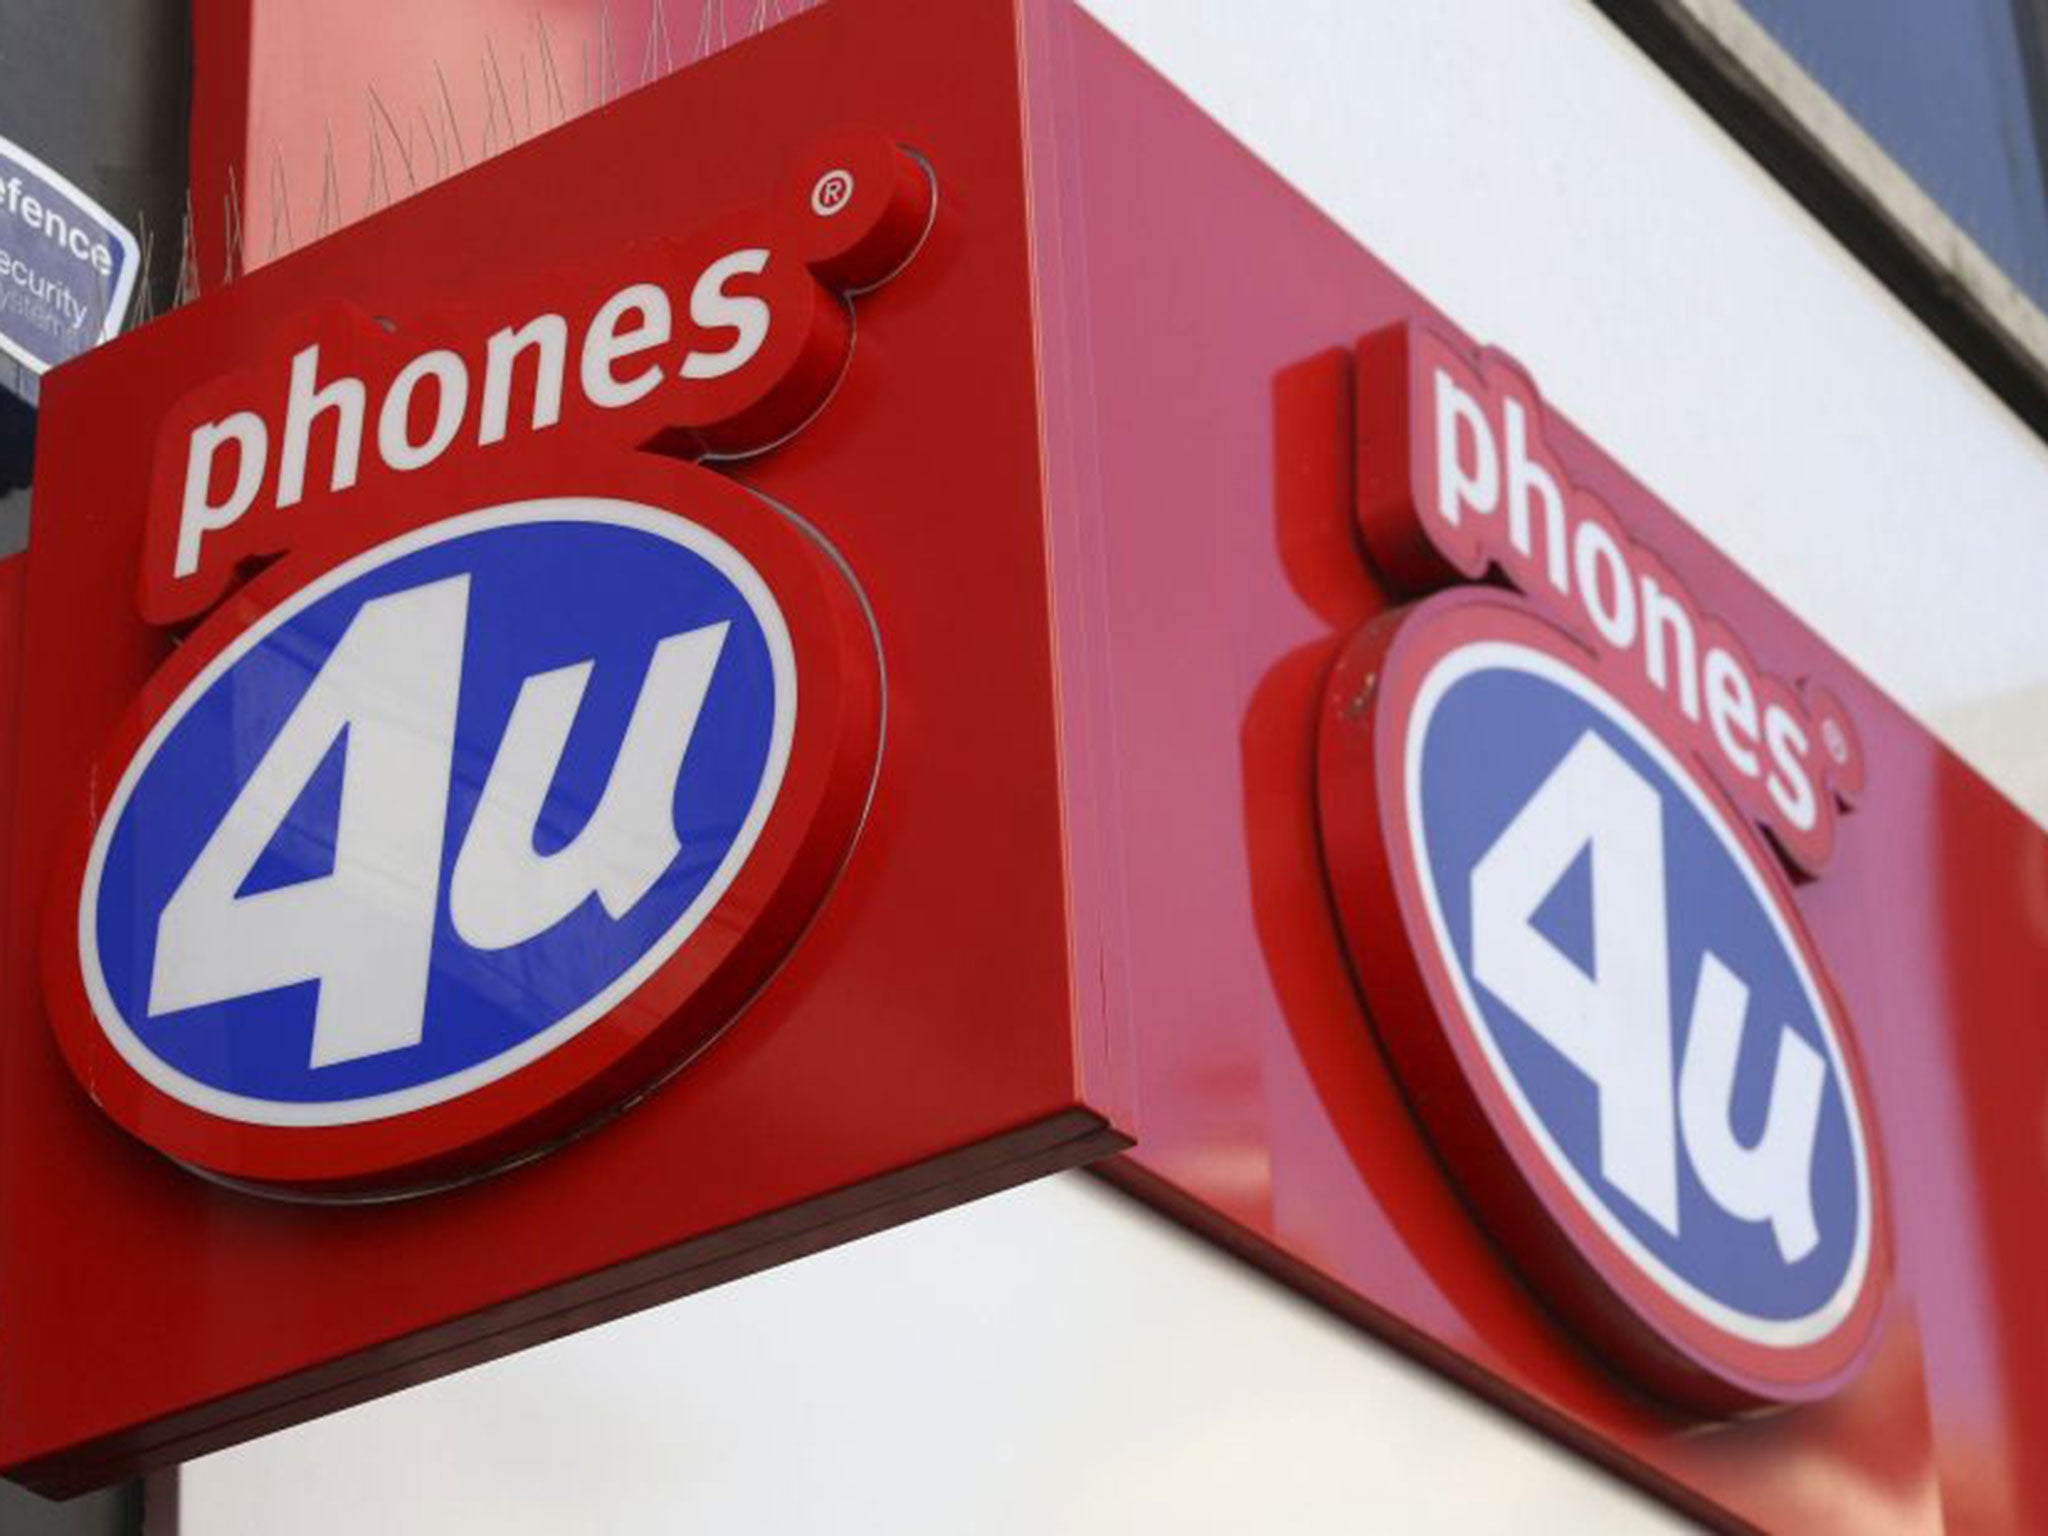 The collapse of Phones 4U will threaten the loss of 5,000 jobs